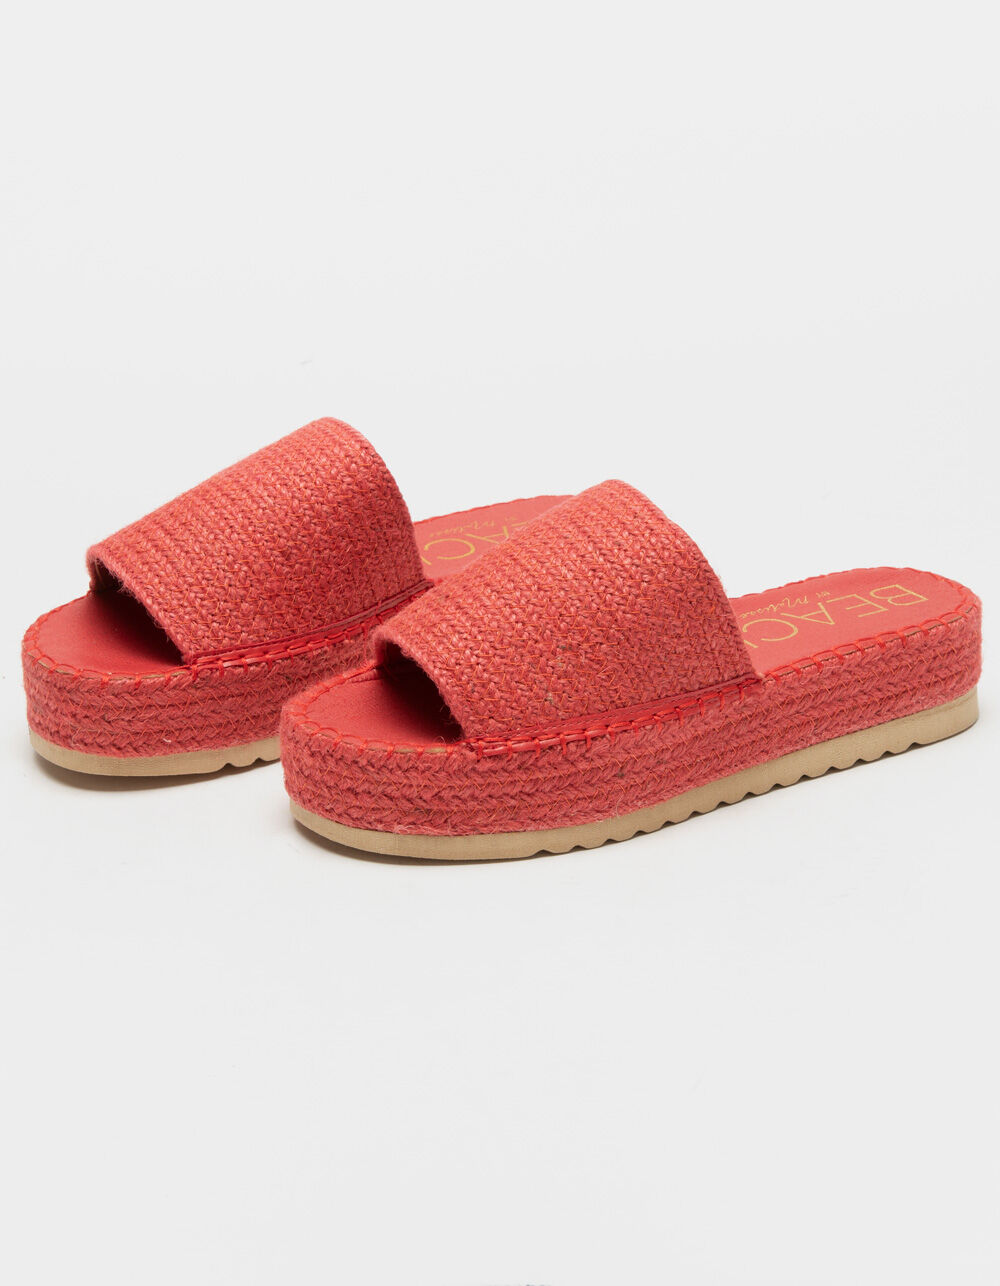 COCONUTS By Matisse Del Mar Womens Red Espadrille Flatform Sandals ...